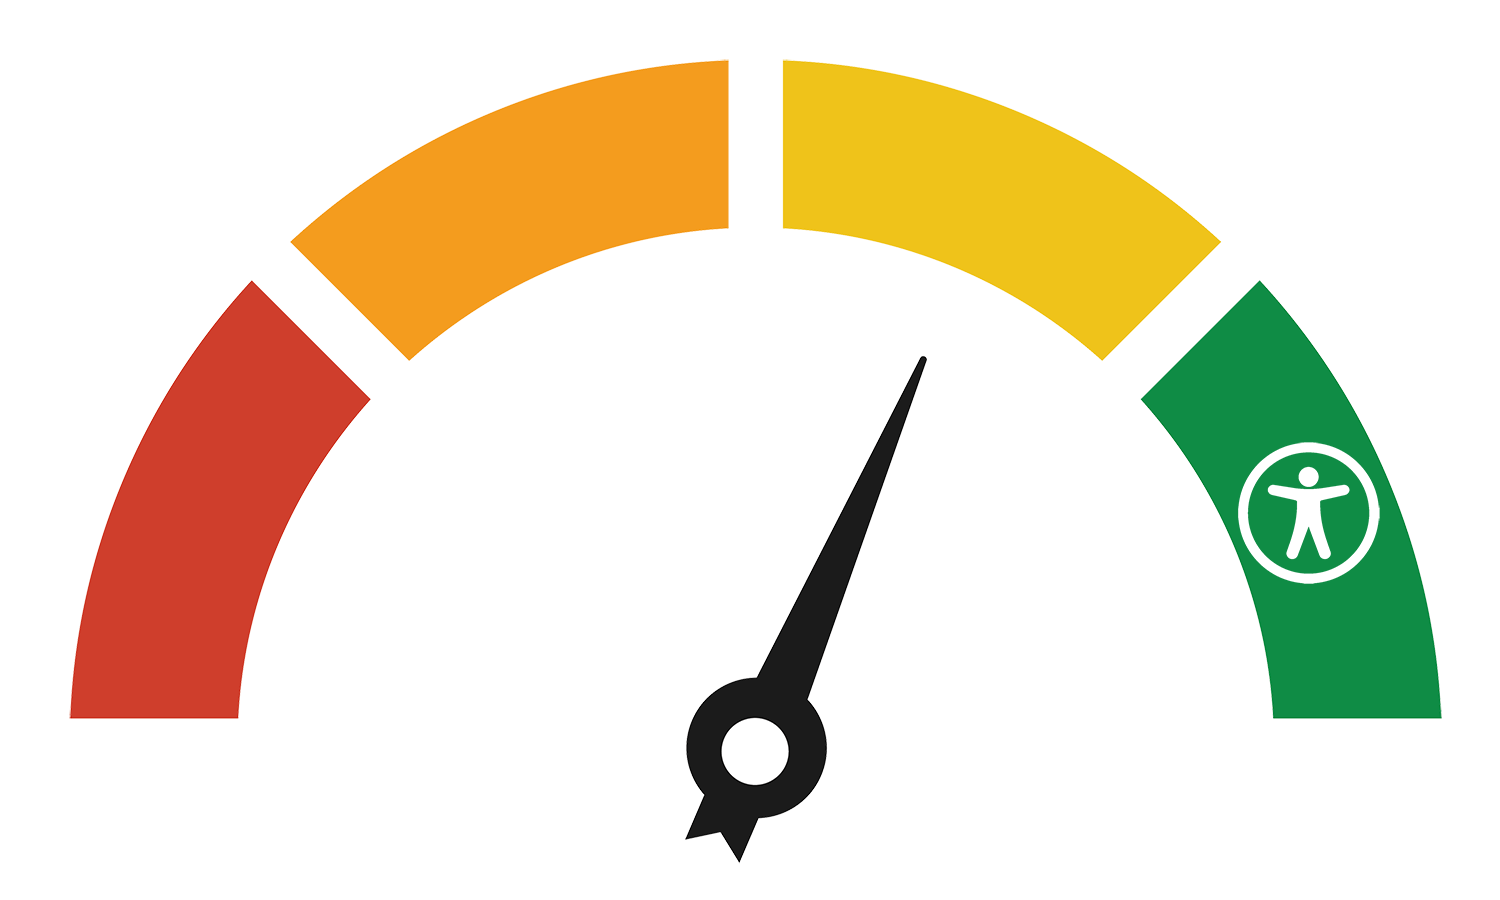 red to green progress meter for website accessibility audits, where green indicates accessibility